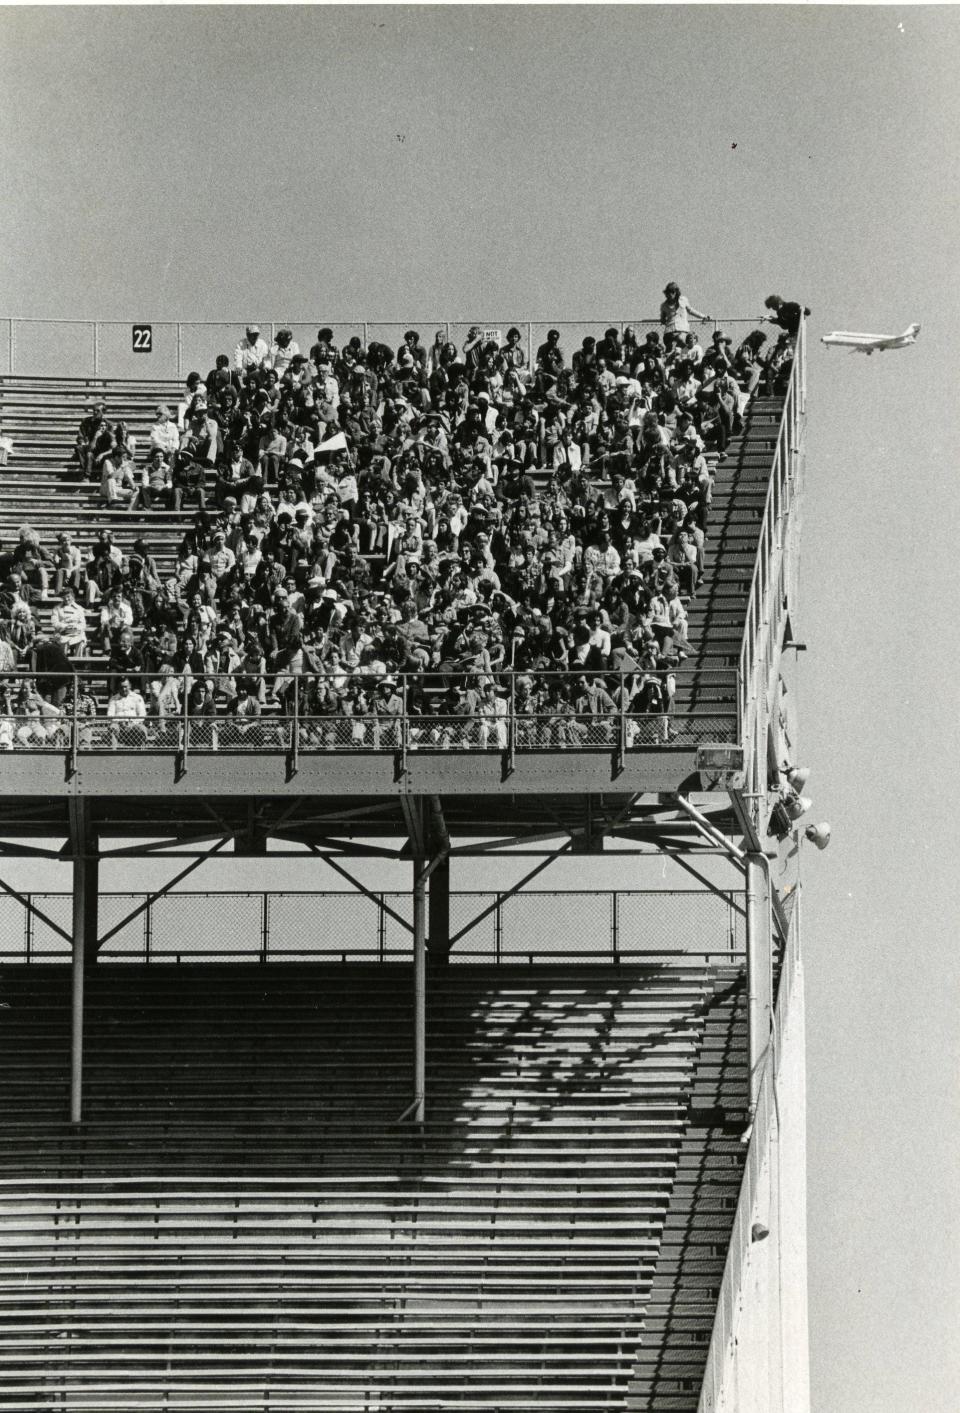 Jan. 29, 1976: A bit of Hollywood magic is shown in this photo, as only part of the stands were filmed to simulate Super Bowl-sized crowds for a scene from &#8217;Black Sunday.&#8217;